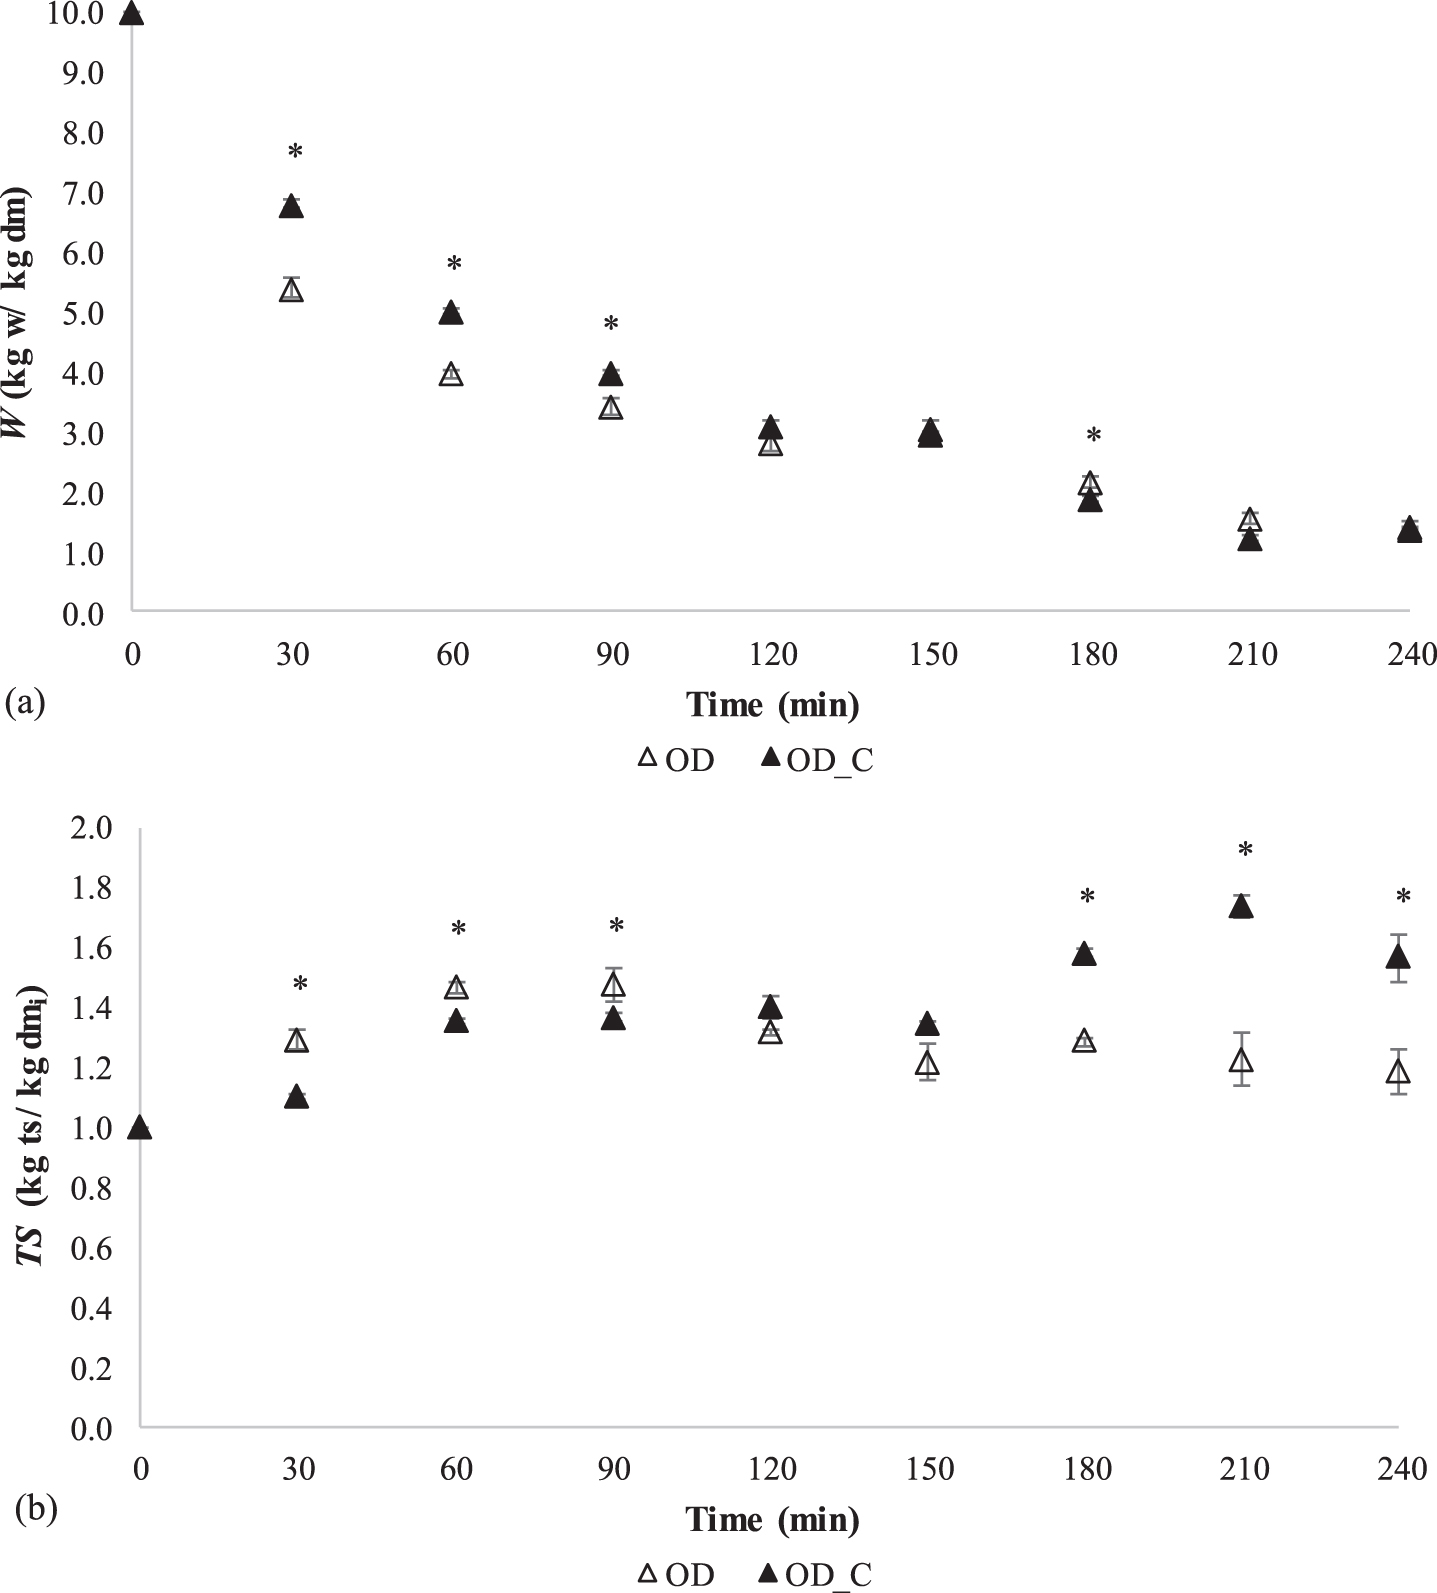 Drying kinetics of moisture (a) and total solid (b) contents during osmotic dehydration treatments in strawberry samples (▴-coated; Δ-non-coated). The error bars are based on mean±SD (n = 4). Significant differences (Fisher LSD; 0.05) between coated (OD_C) and non-coated (OD) samples are marked with an asterisk (*) for a given OD time.